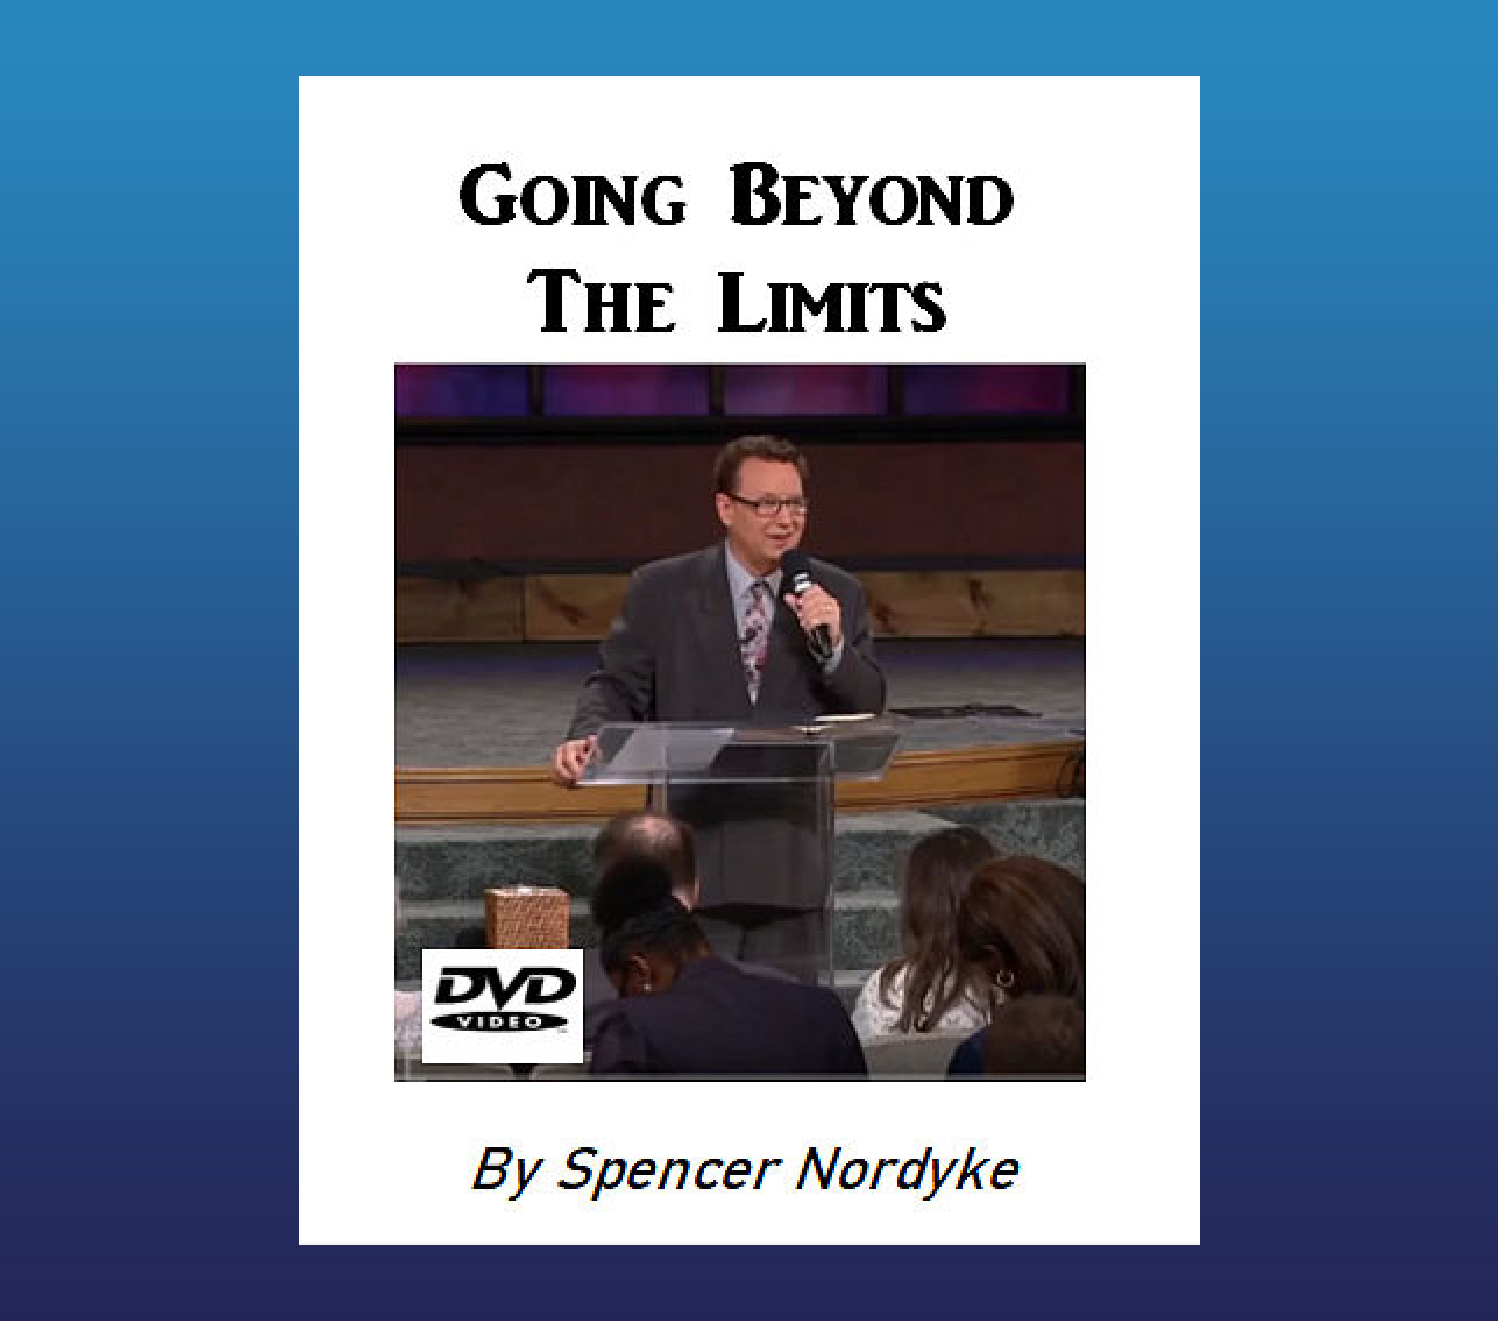 Going Beyond The Limits DVD